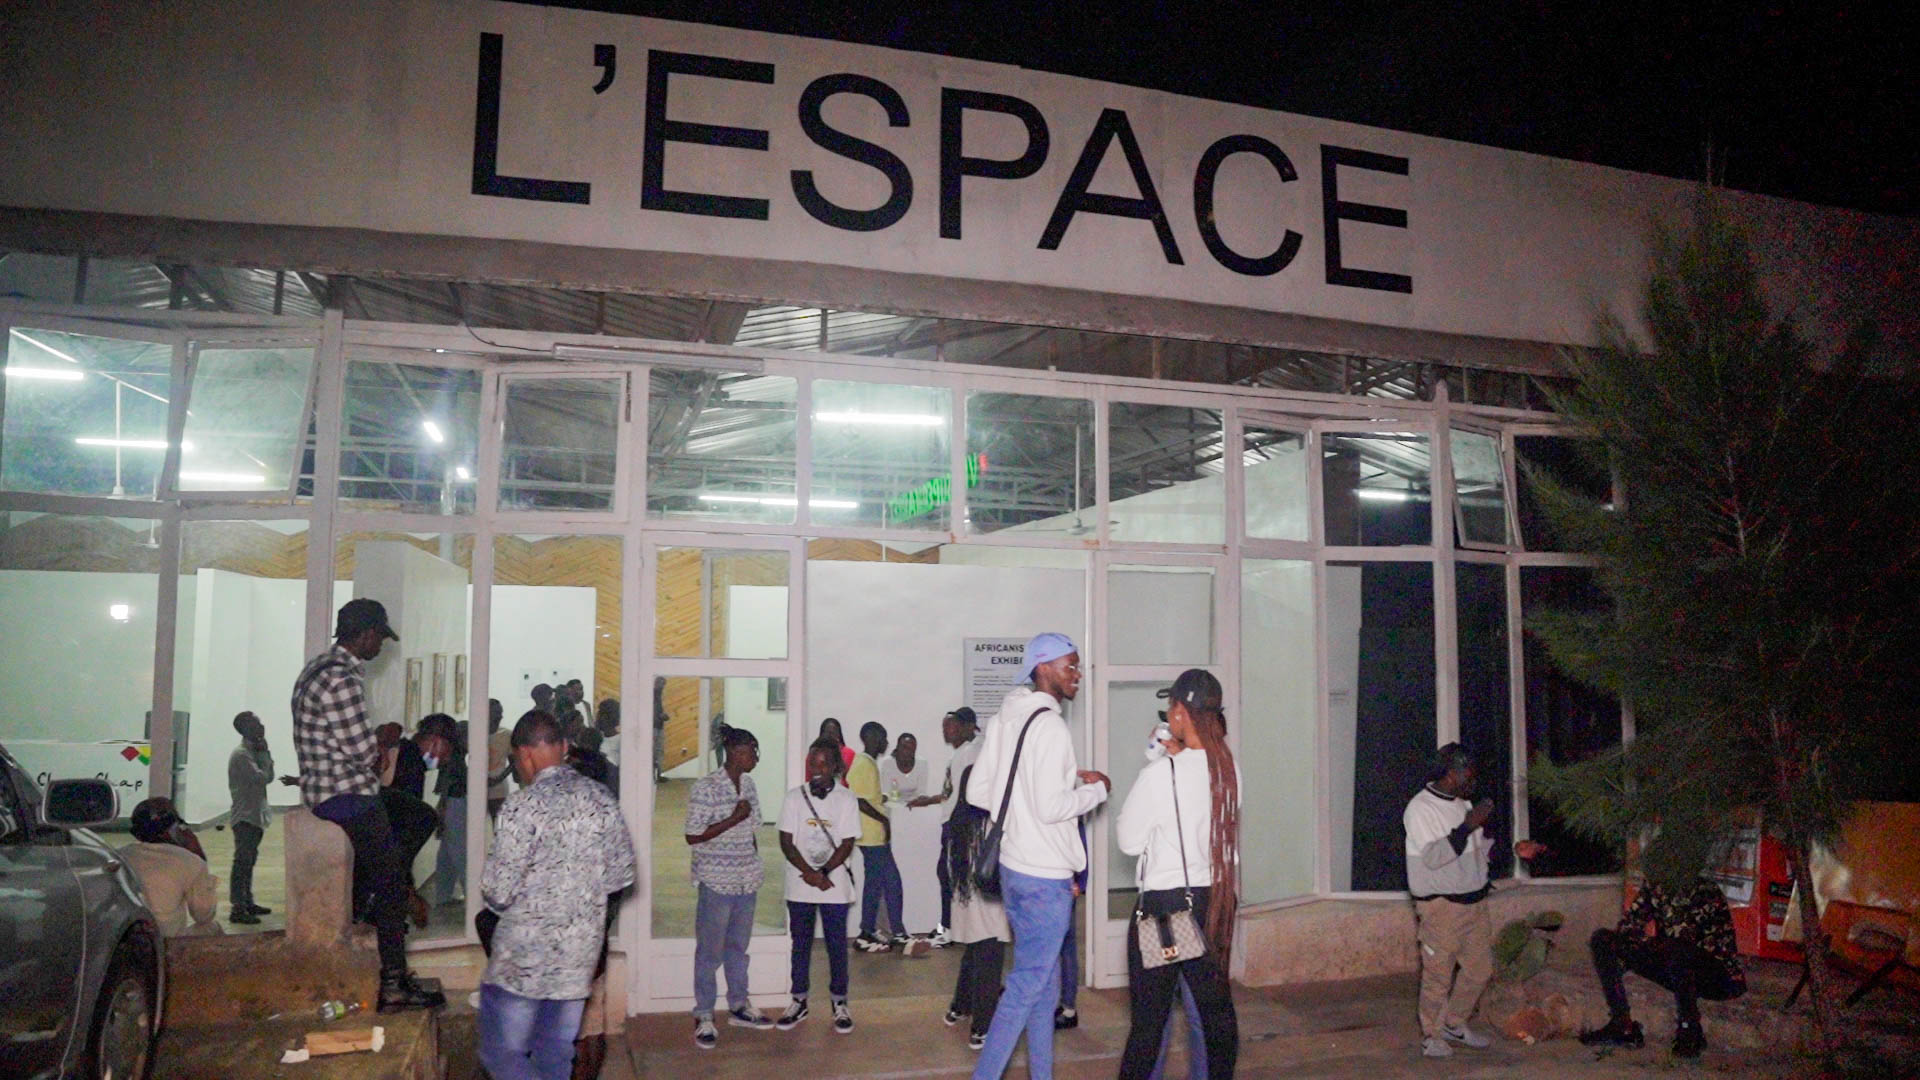 The exhibition is taking place at L'Espace and mostly young people attended.